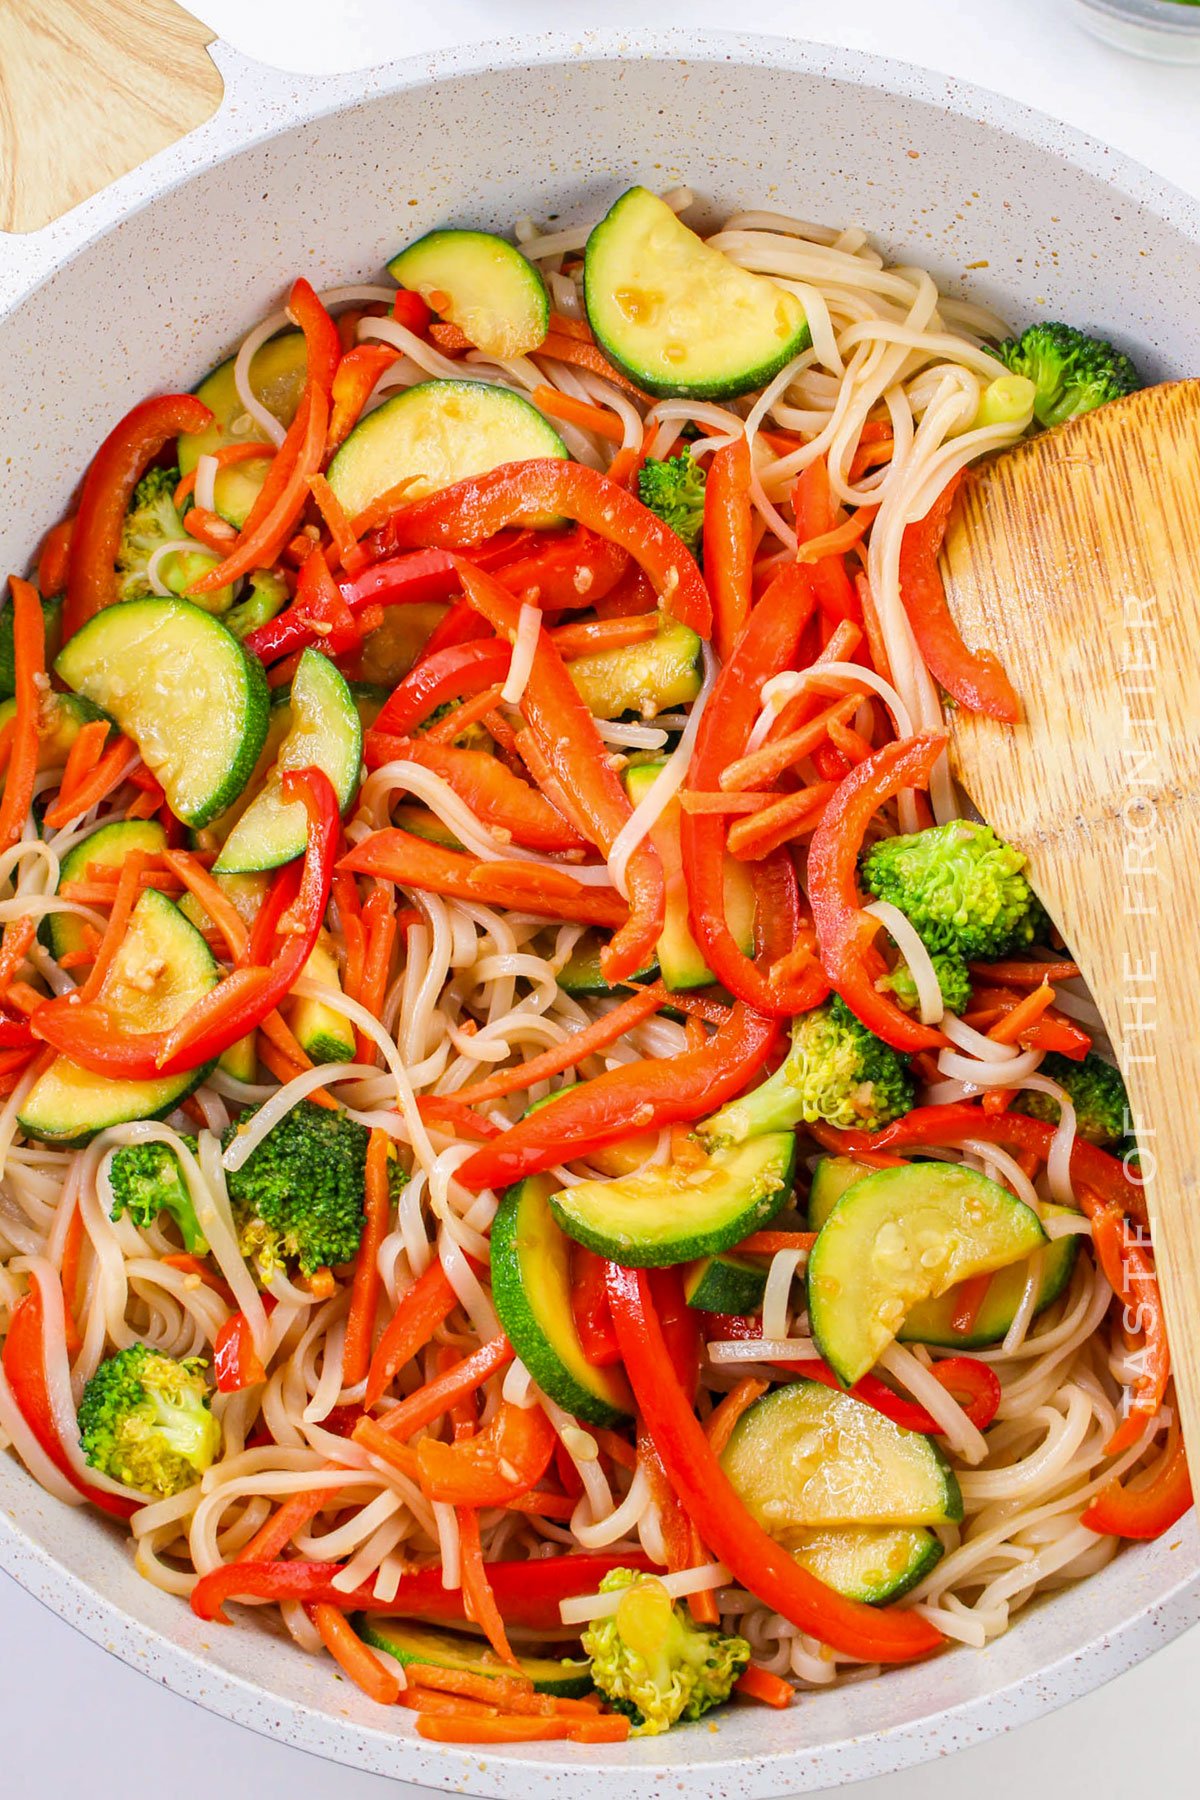 mixing the veggies and noodles